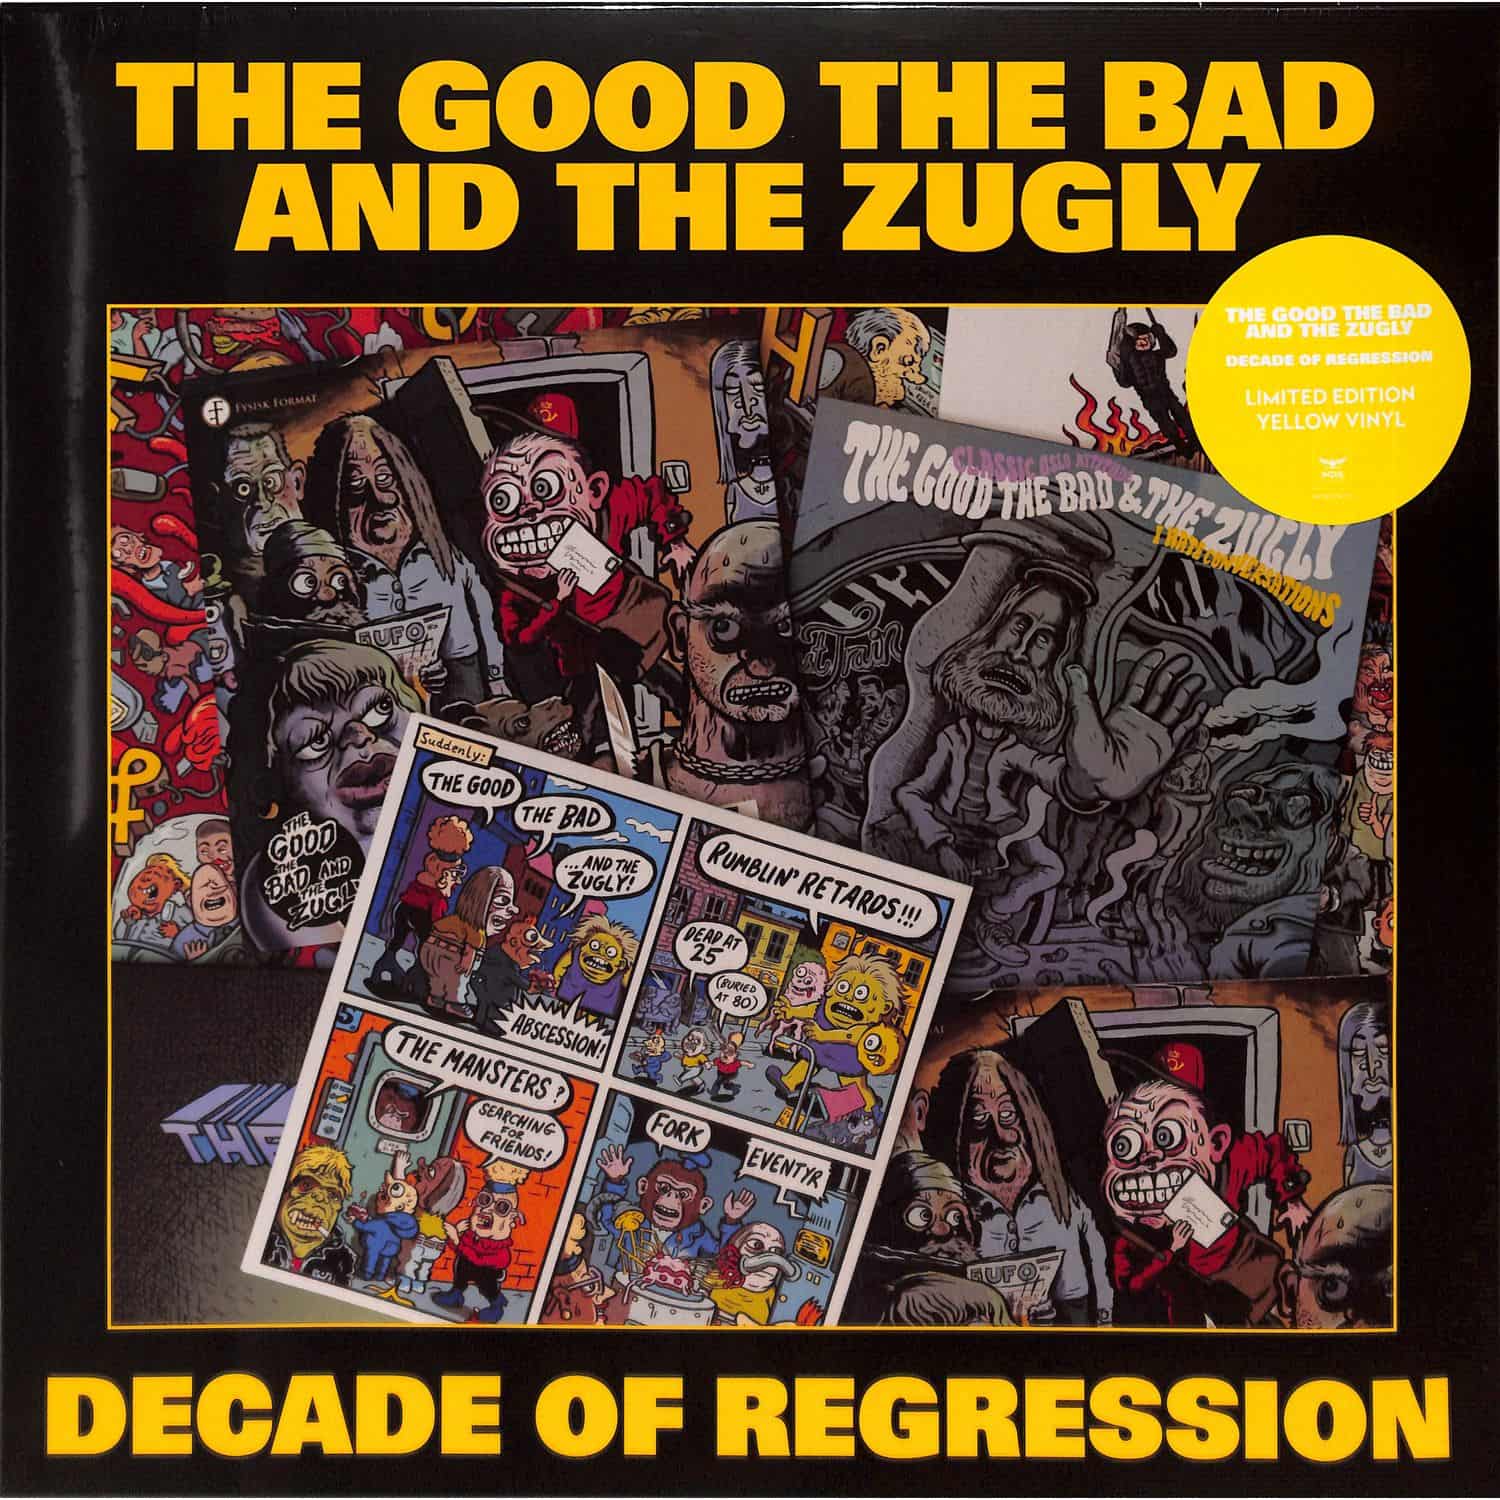 The Bad The Good & The Zugly - DECADE OF REGRESSION 